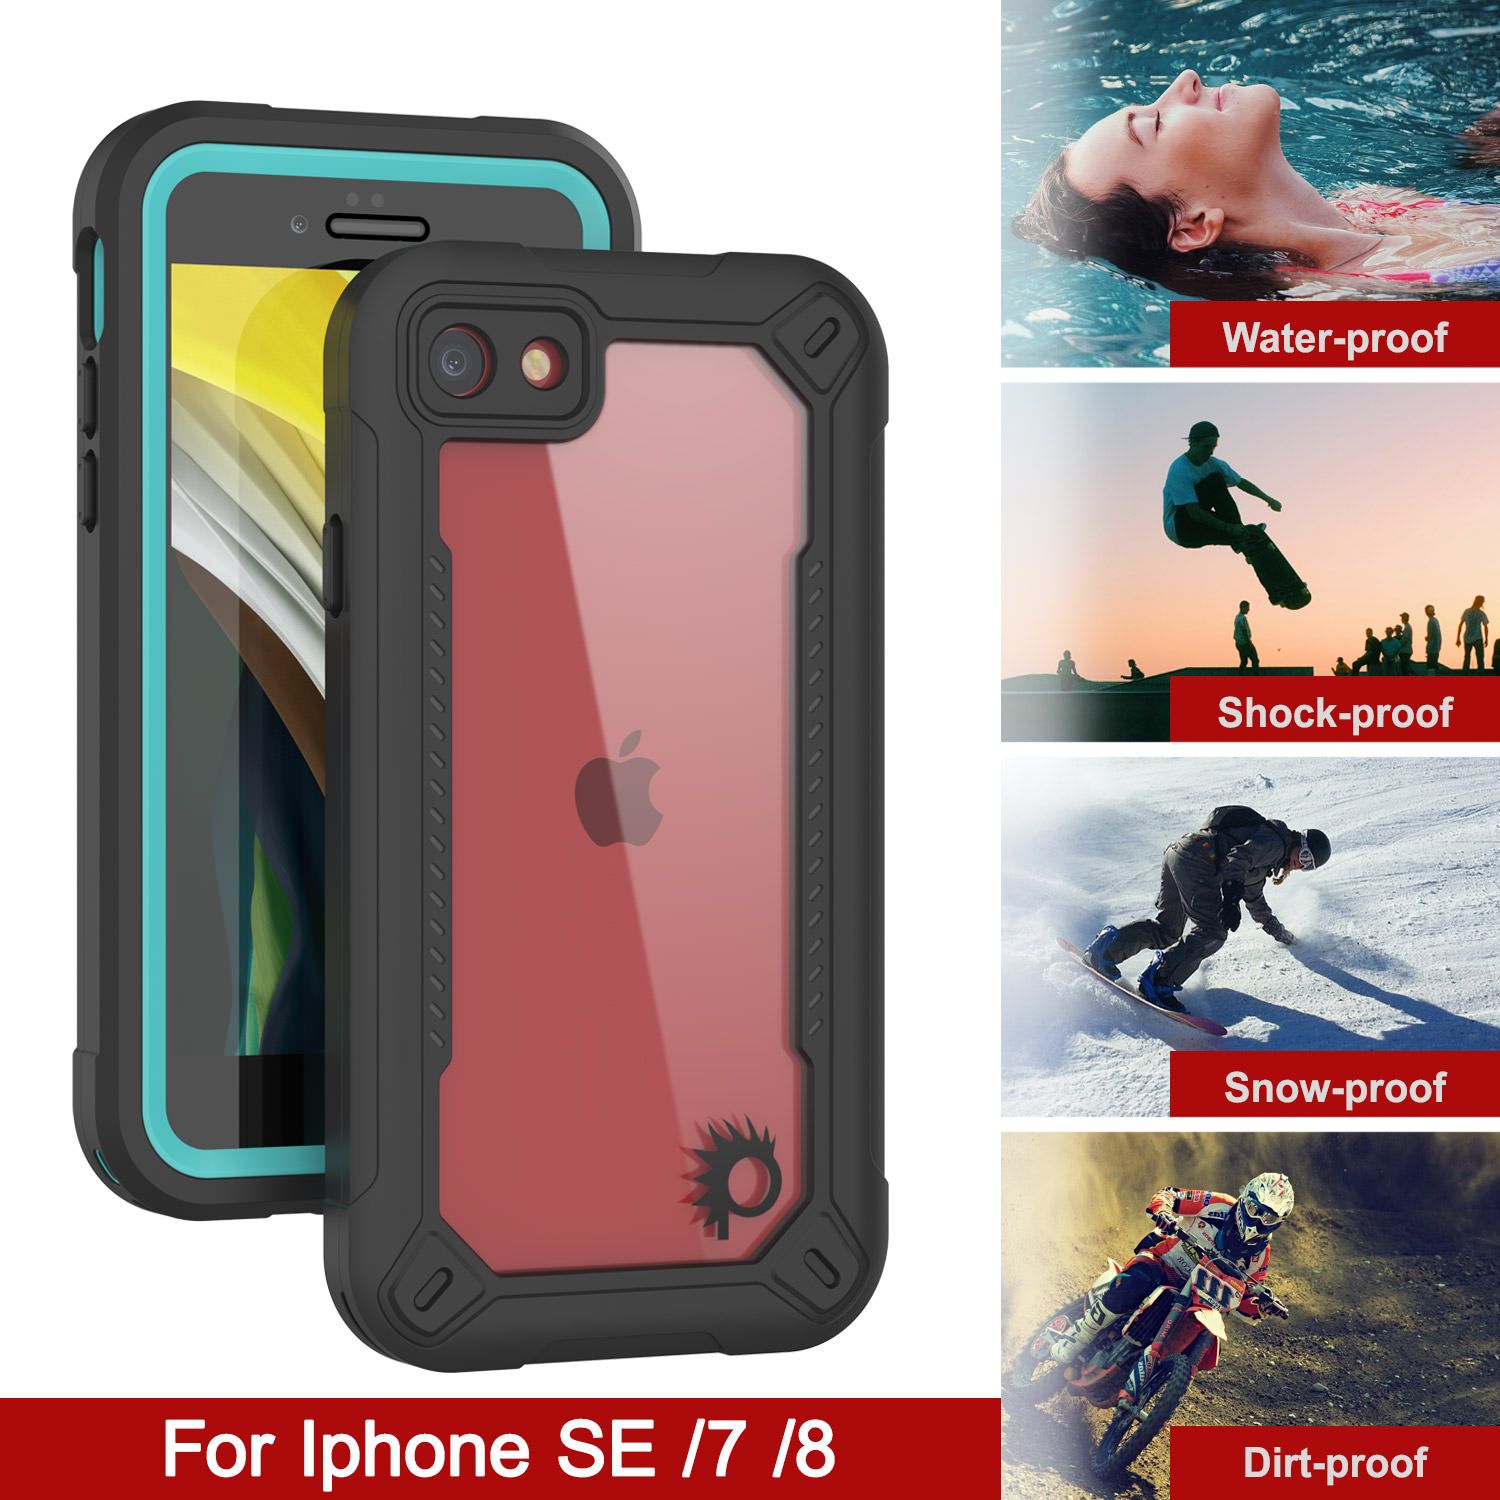 iPhone 7 Waterproof IP68 Case, Punkcase [teal]  [Maximus Series] [Slim Fit] [IP68 Certified] [Shockresistant] Clear Armor Cover with Screen Protector | Ultimate Protection